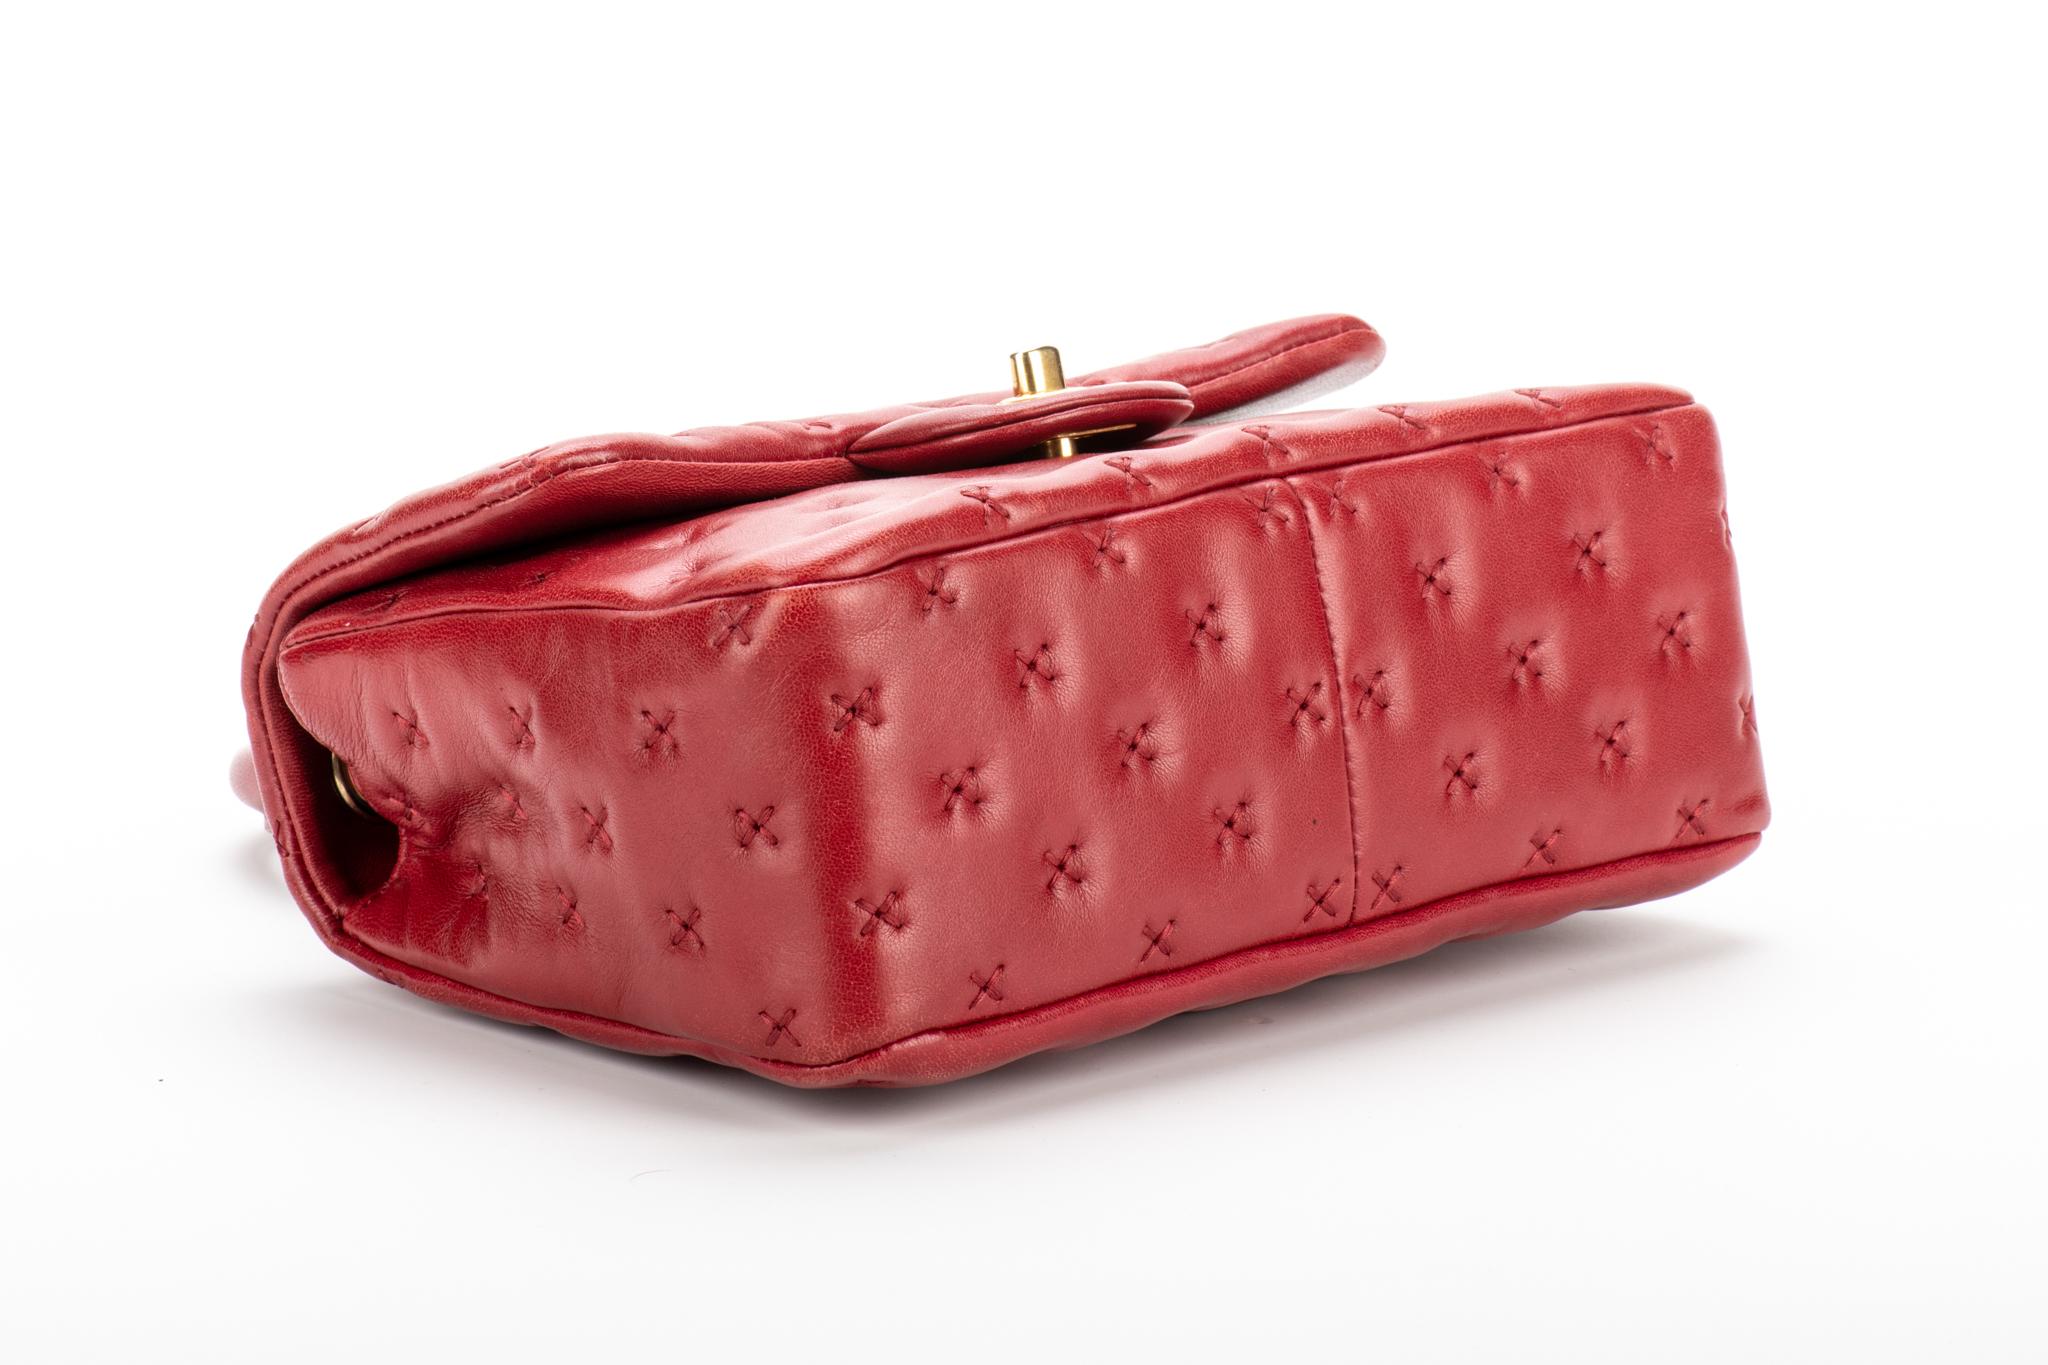 Women's Chanel Limited Edition Red Stitched Coco Handle Bag